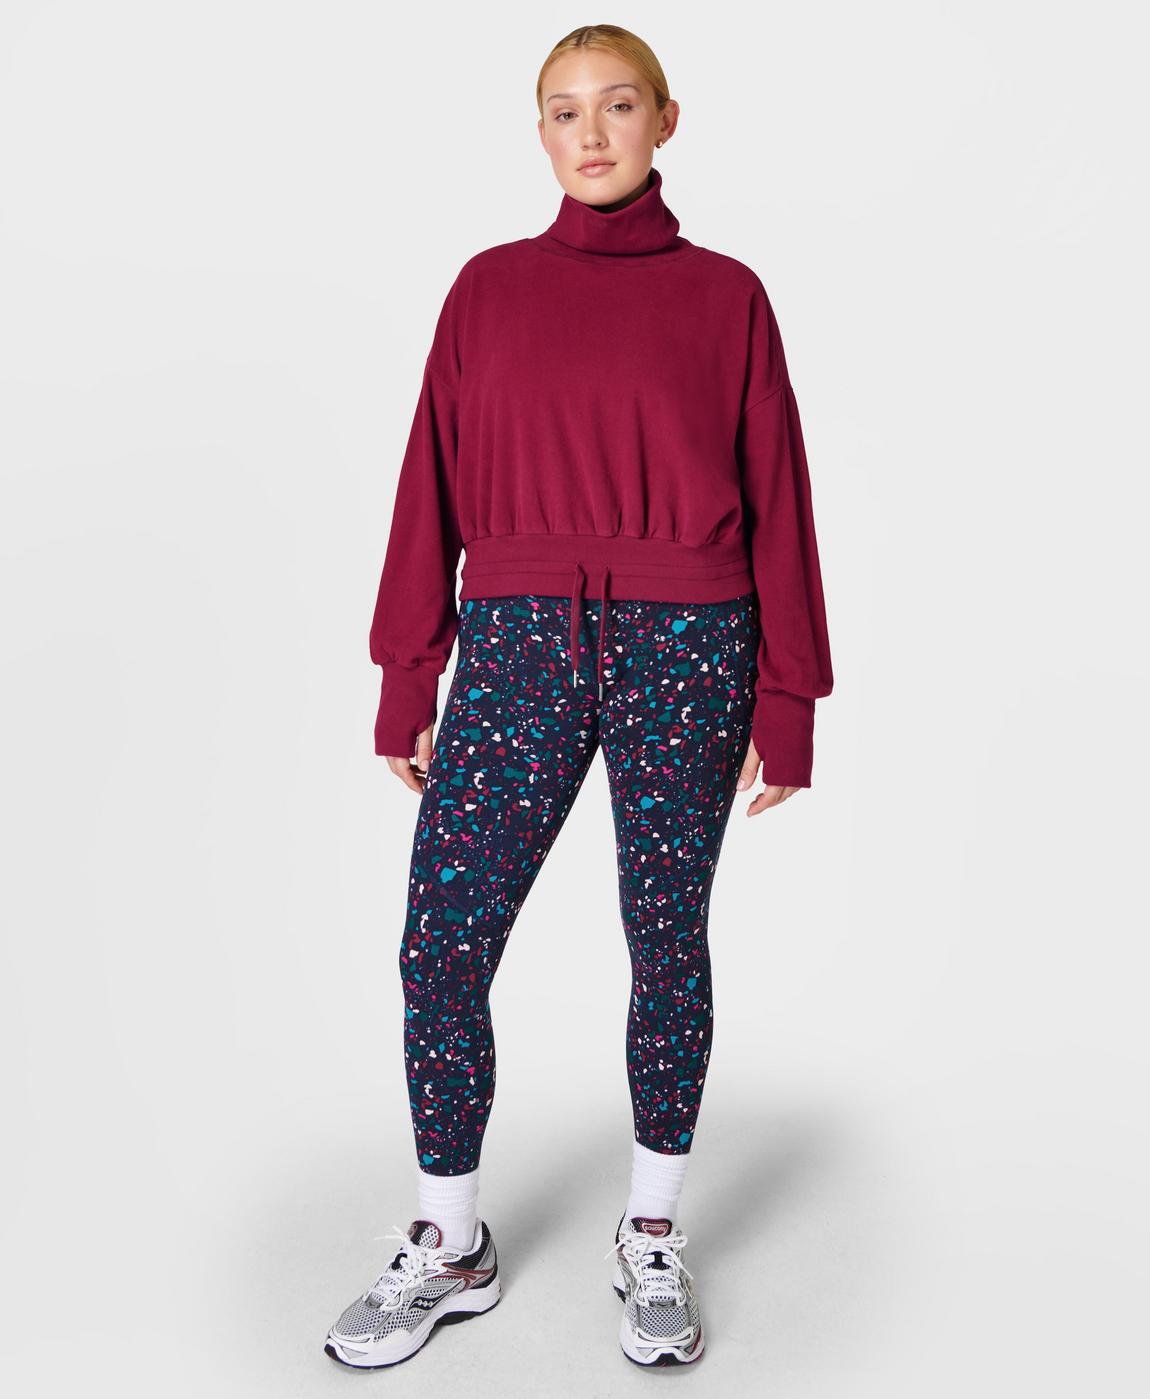 Melody Luxe Fleece Pullover - Vamp Red | Women's Jumpers